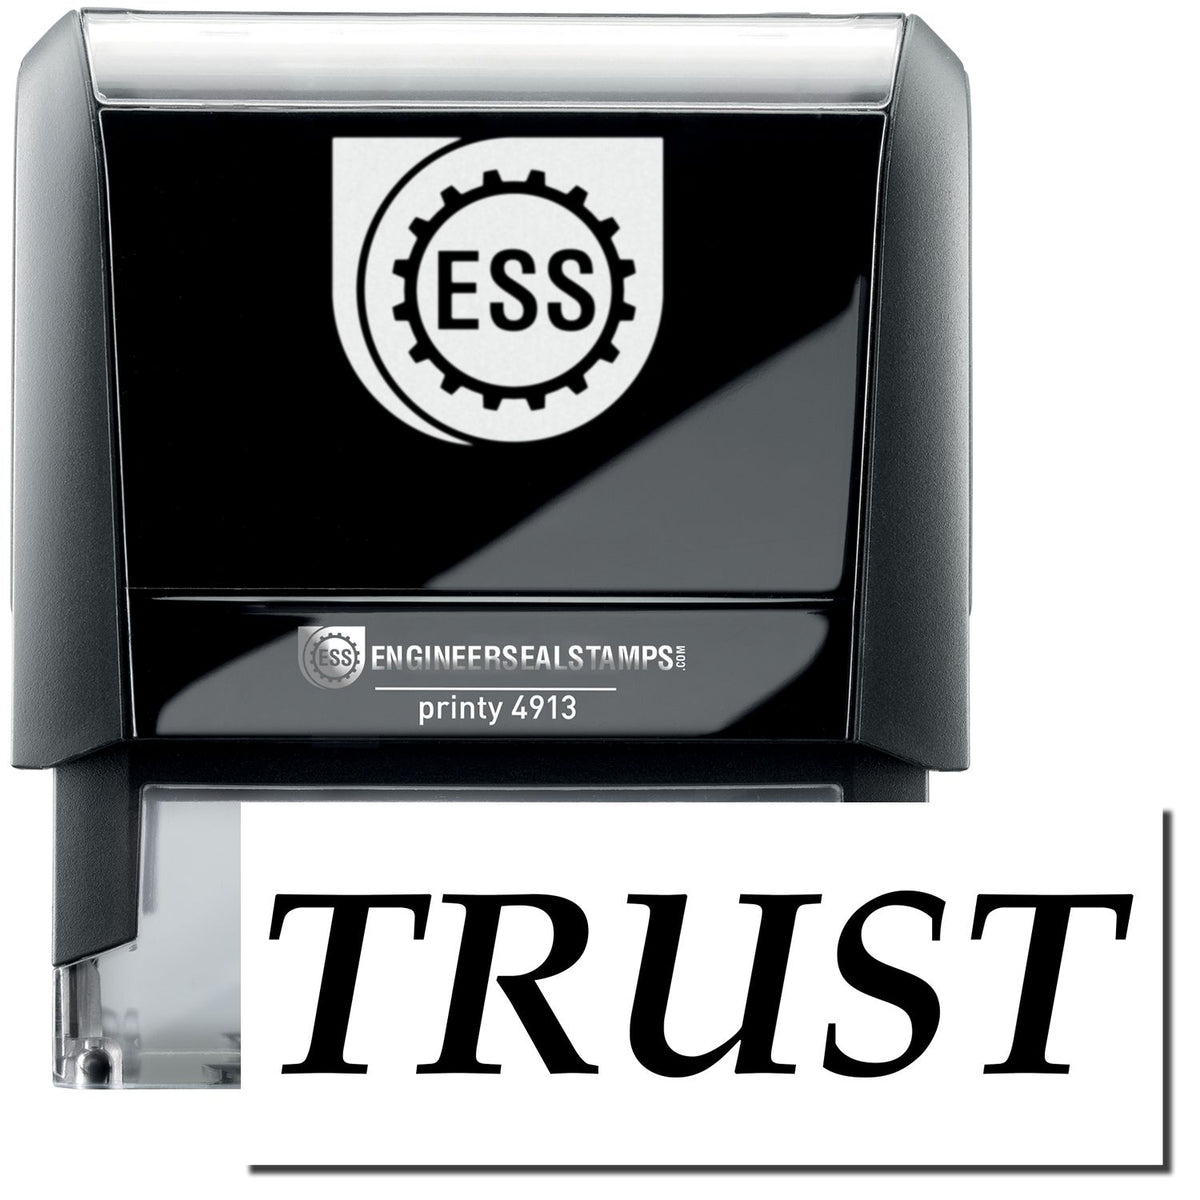 A self-inking stamp with a stamped image showing how the text &quot;TRUST&quot; in a large bold font is displayed by it.